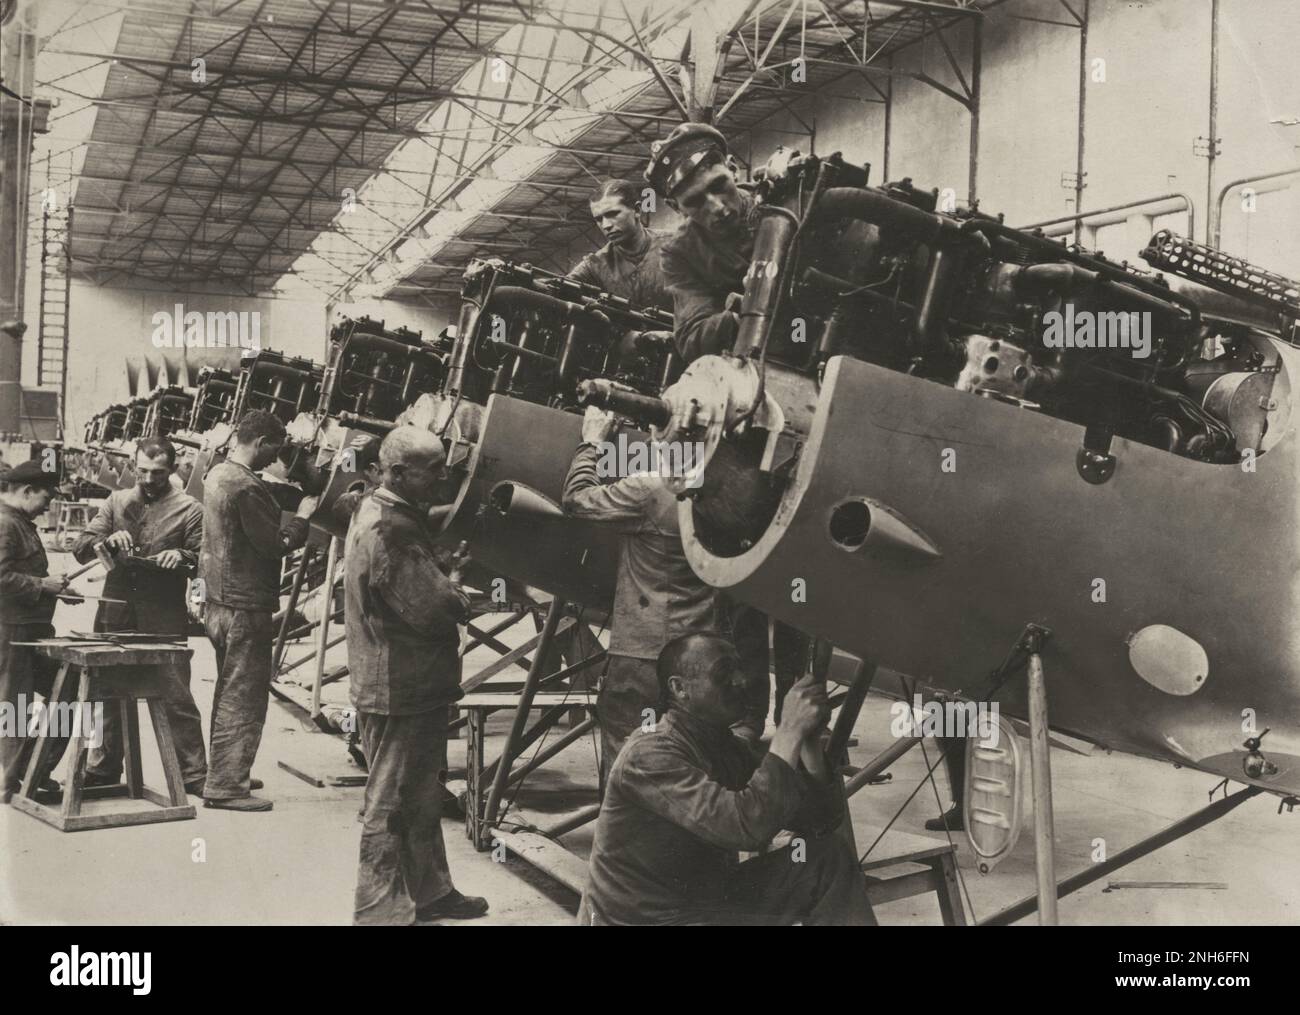 1914-1918. World War I. The assembly of aircraft engines on German combat aircraft on assembly lines. Even the machine gun is already assembled at this stage as you can see on the right side. Stock Photo